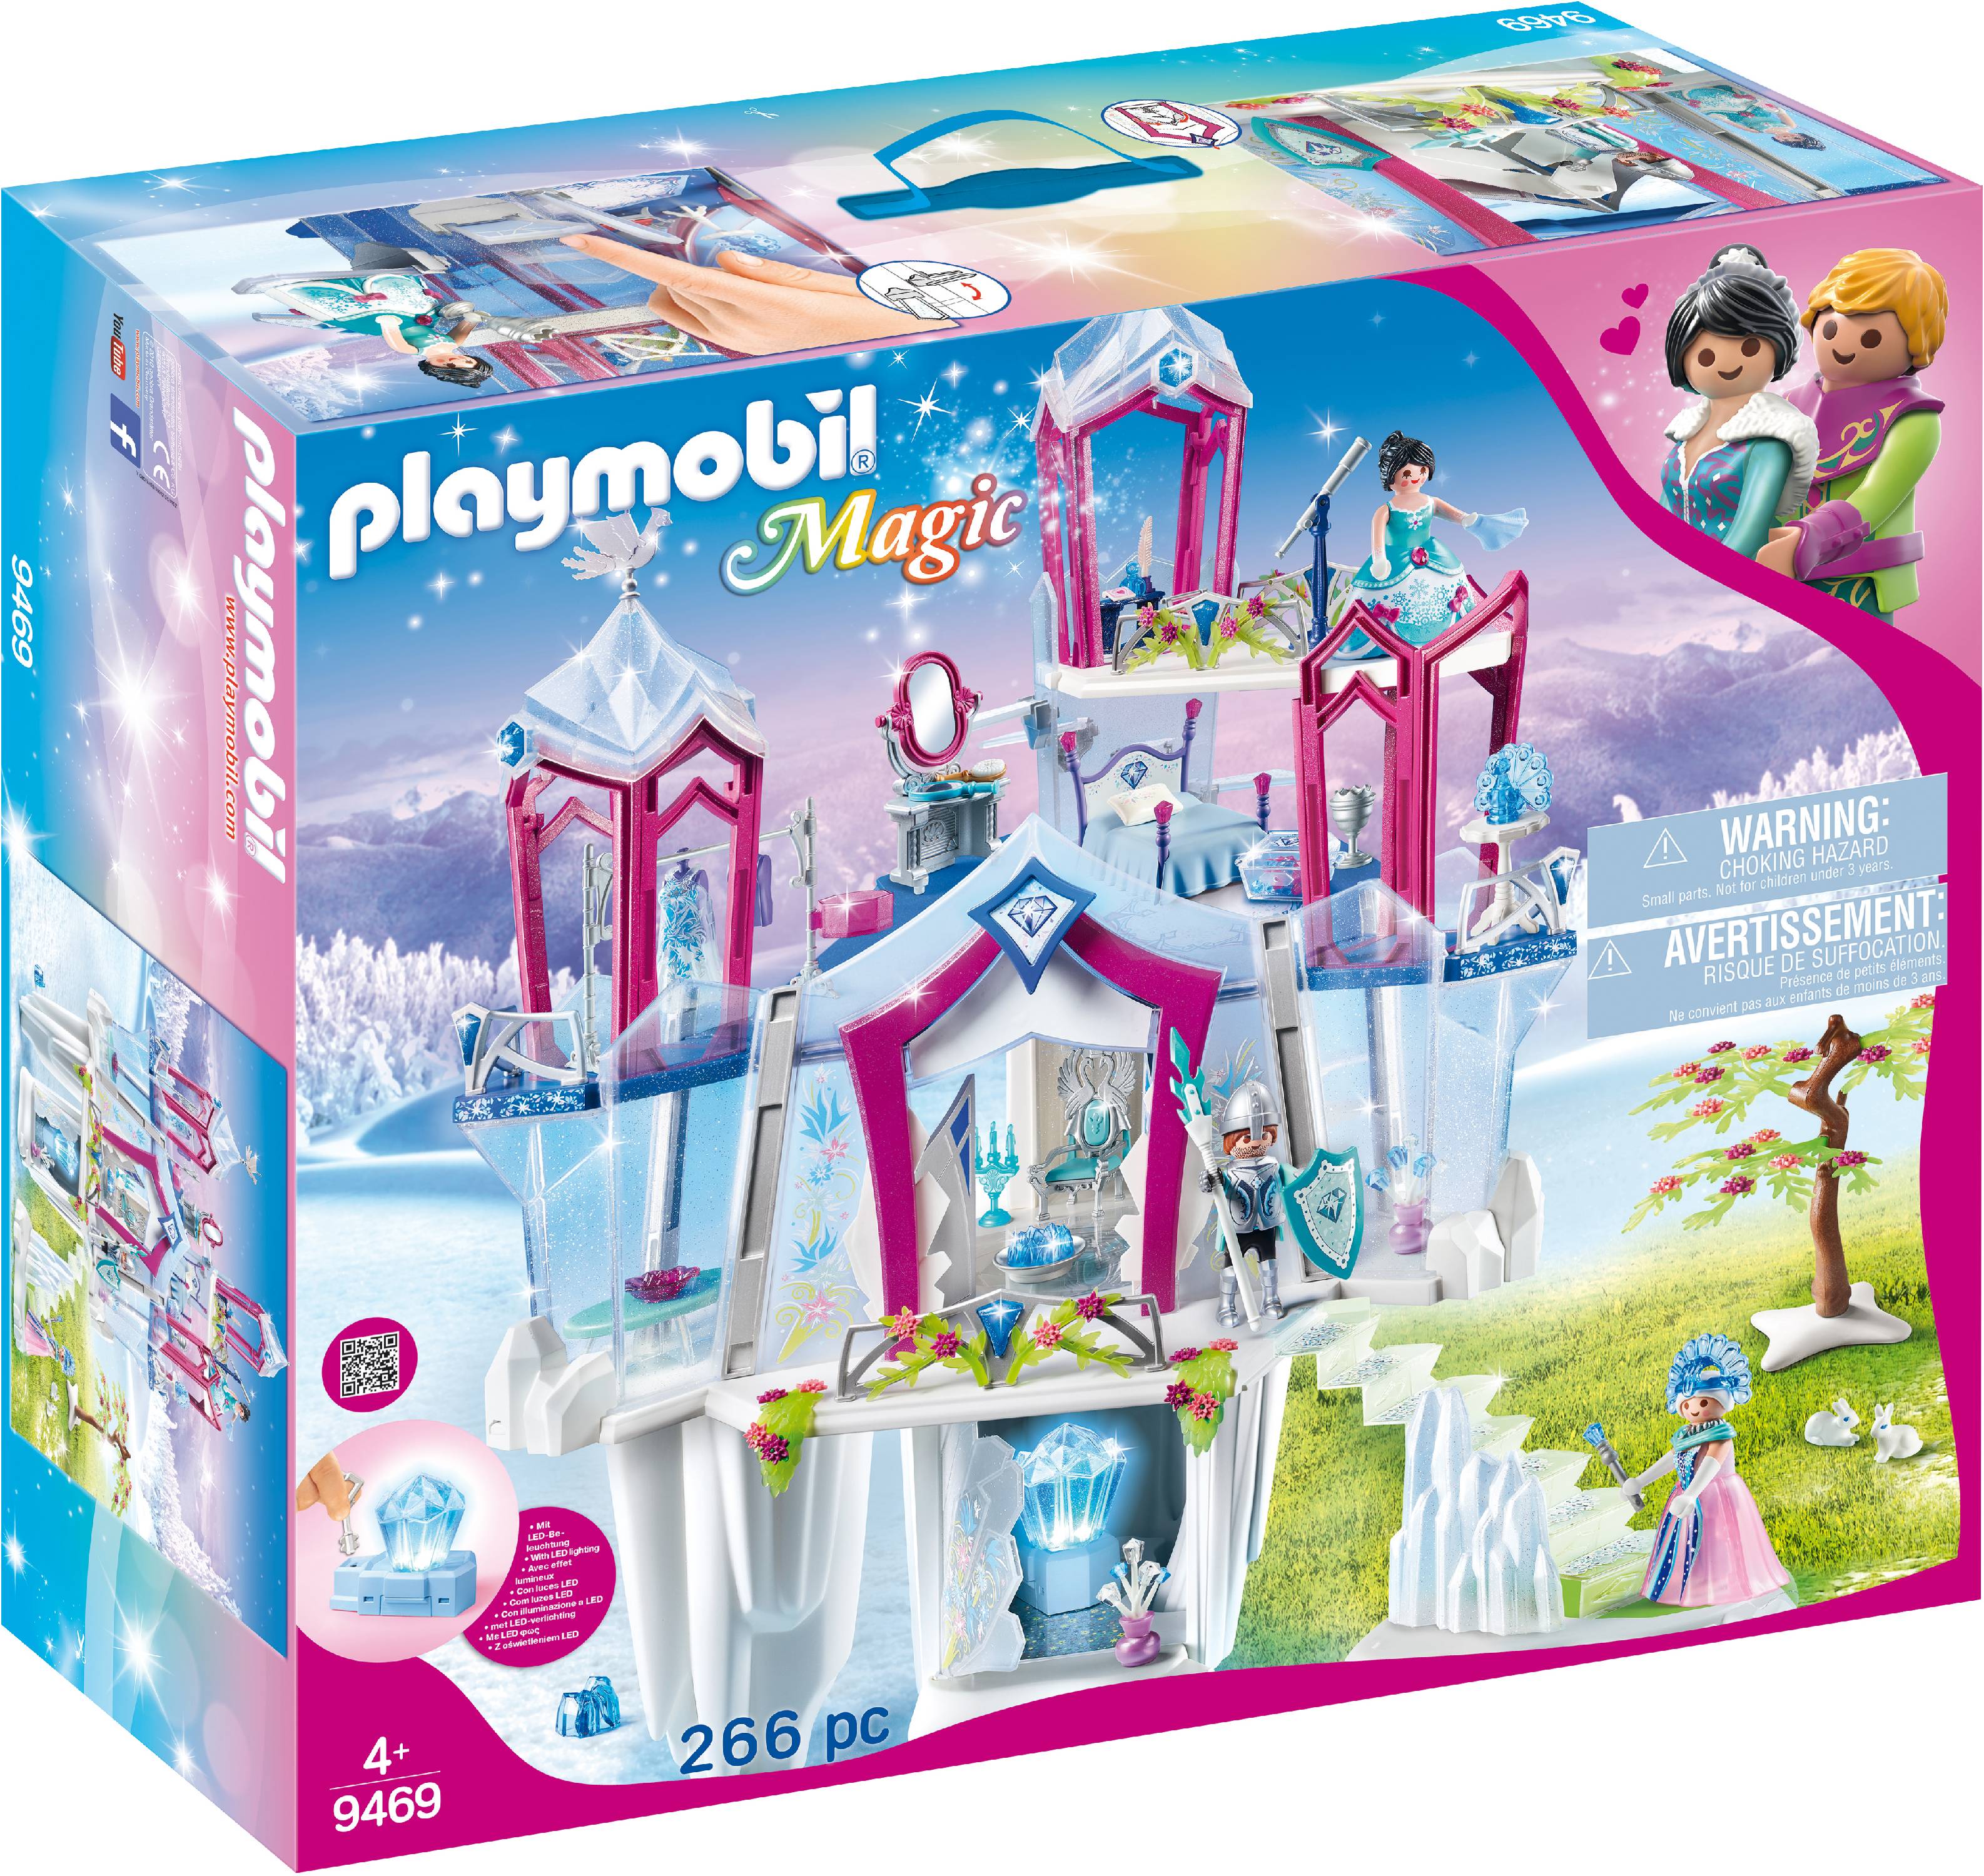 Hottest Christmas toys -CPLAYMOBIL Crystal Palace